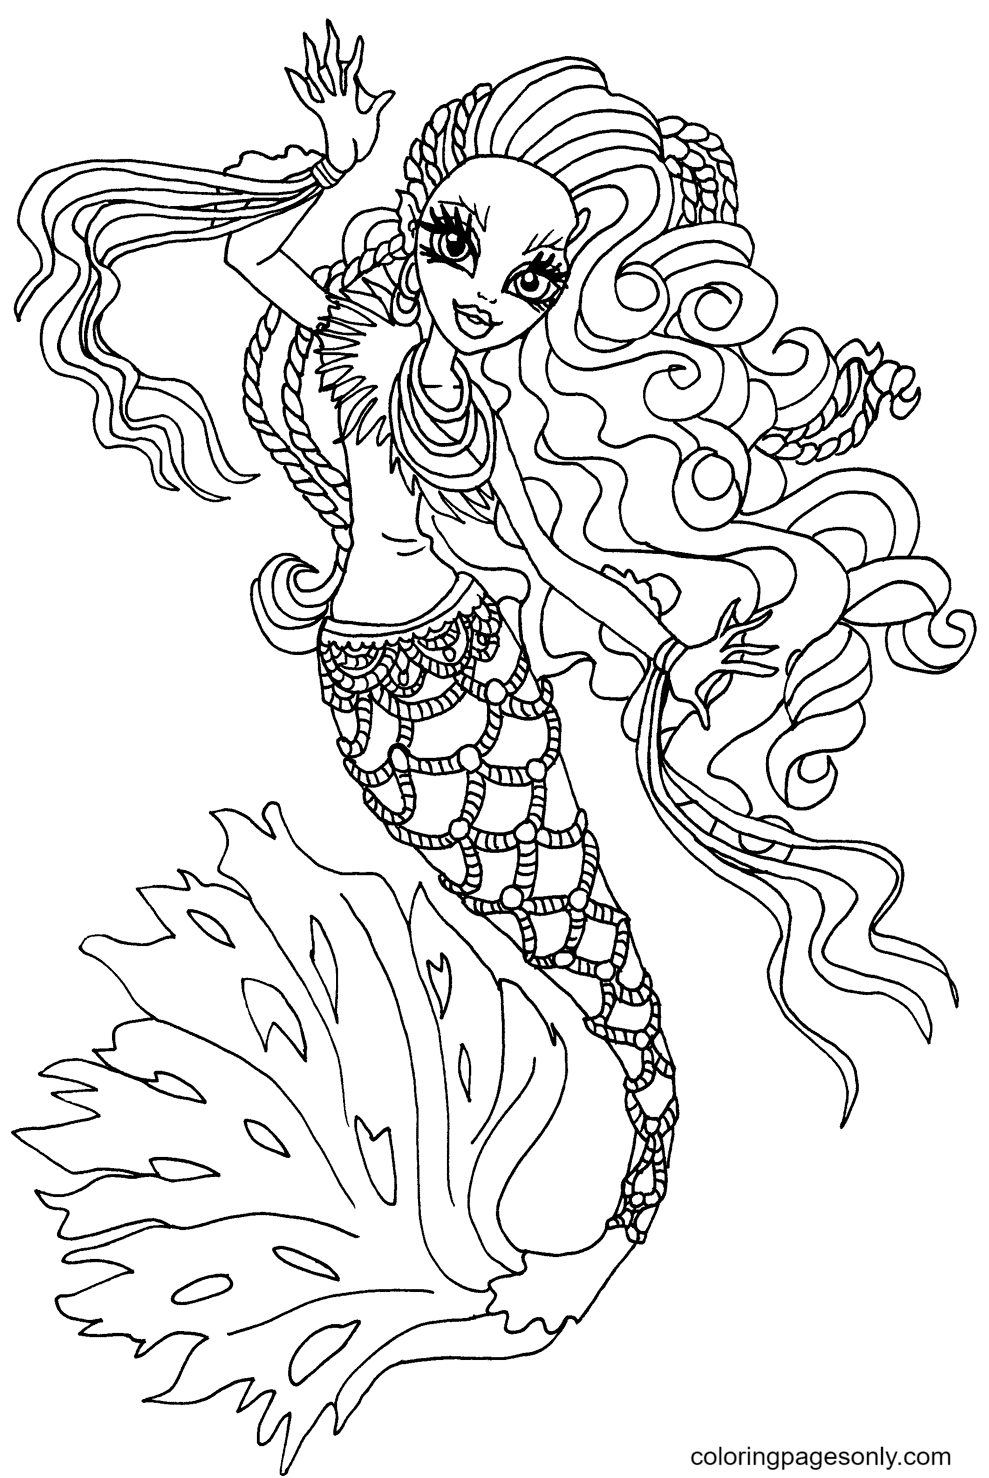 Sirena Von Boo Coloring Pages